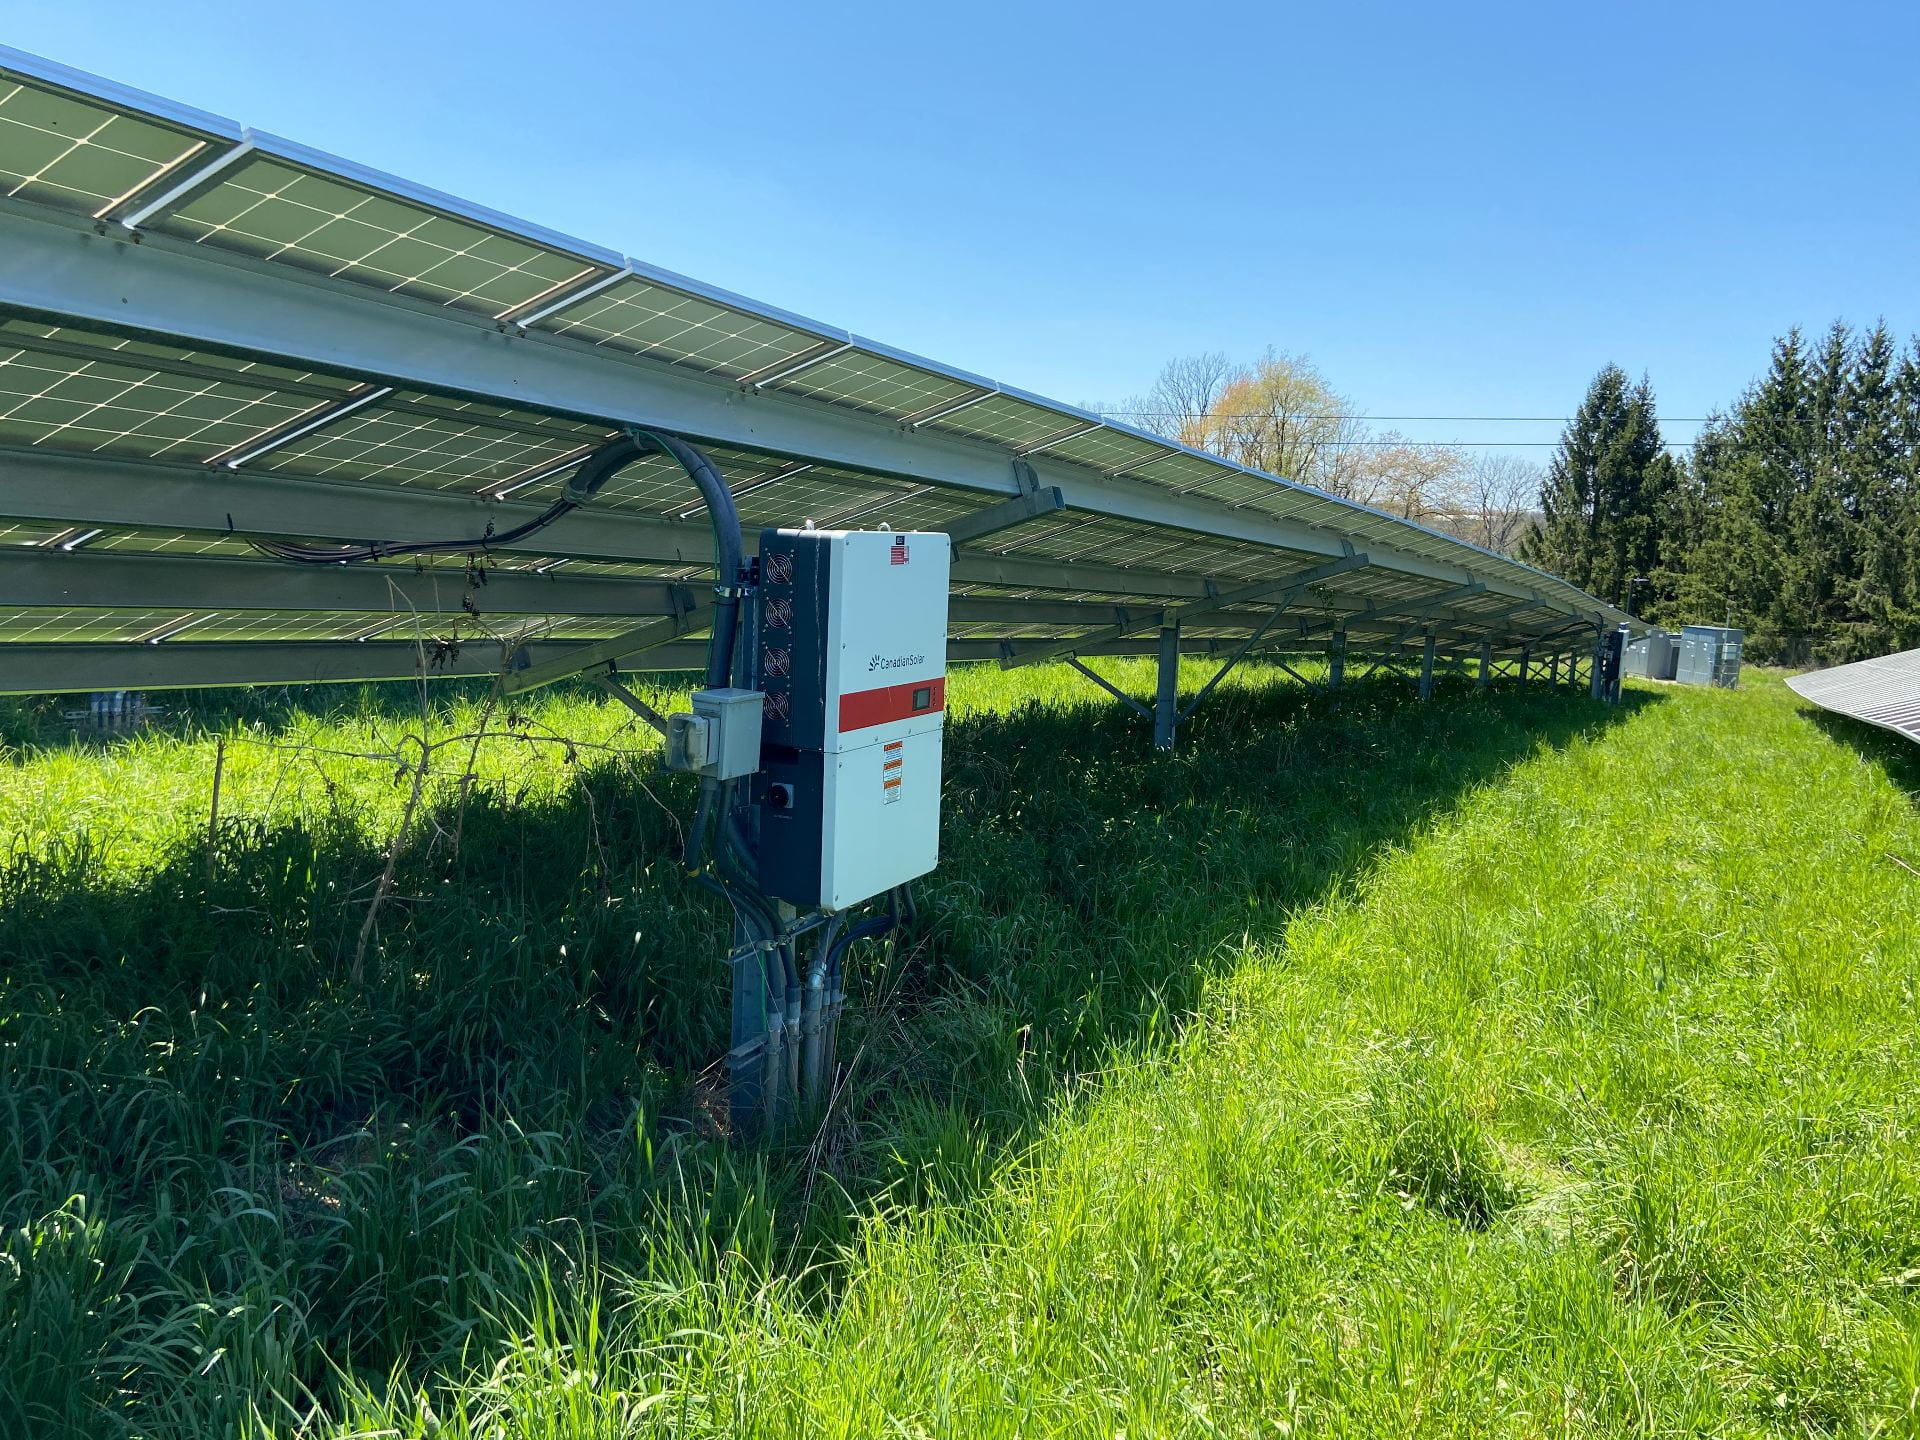 The under-side of a long row of solar panels, showing an inverter. Credit: Penn State MCOR